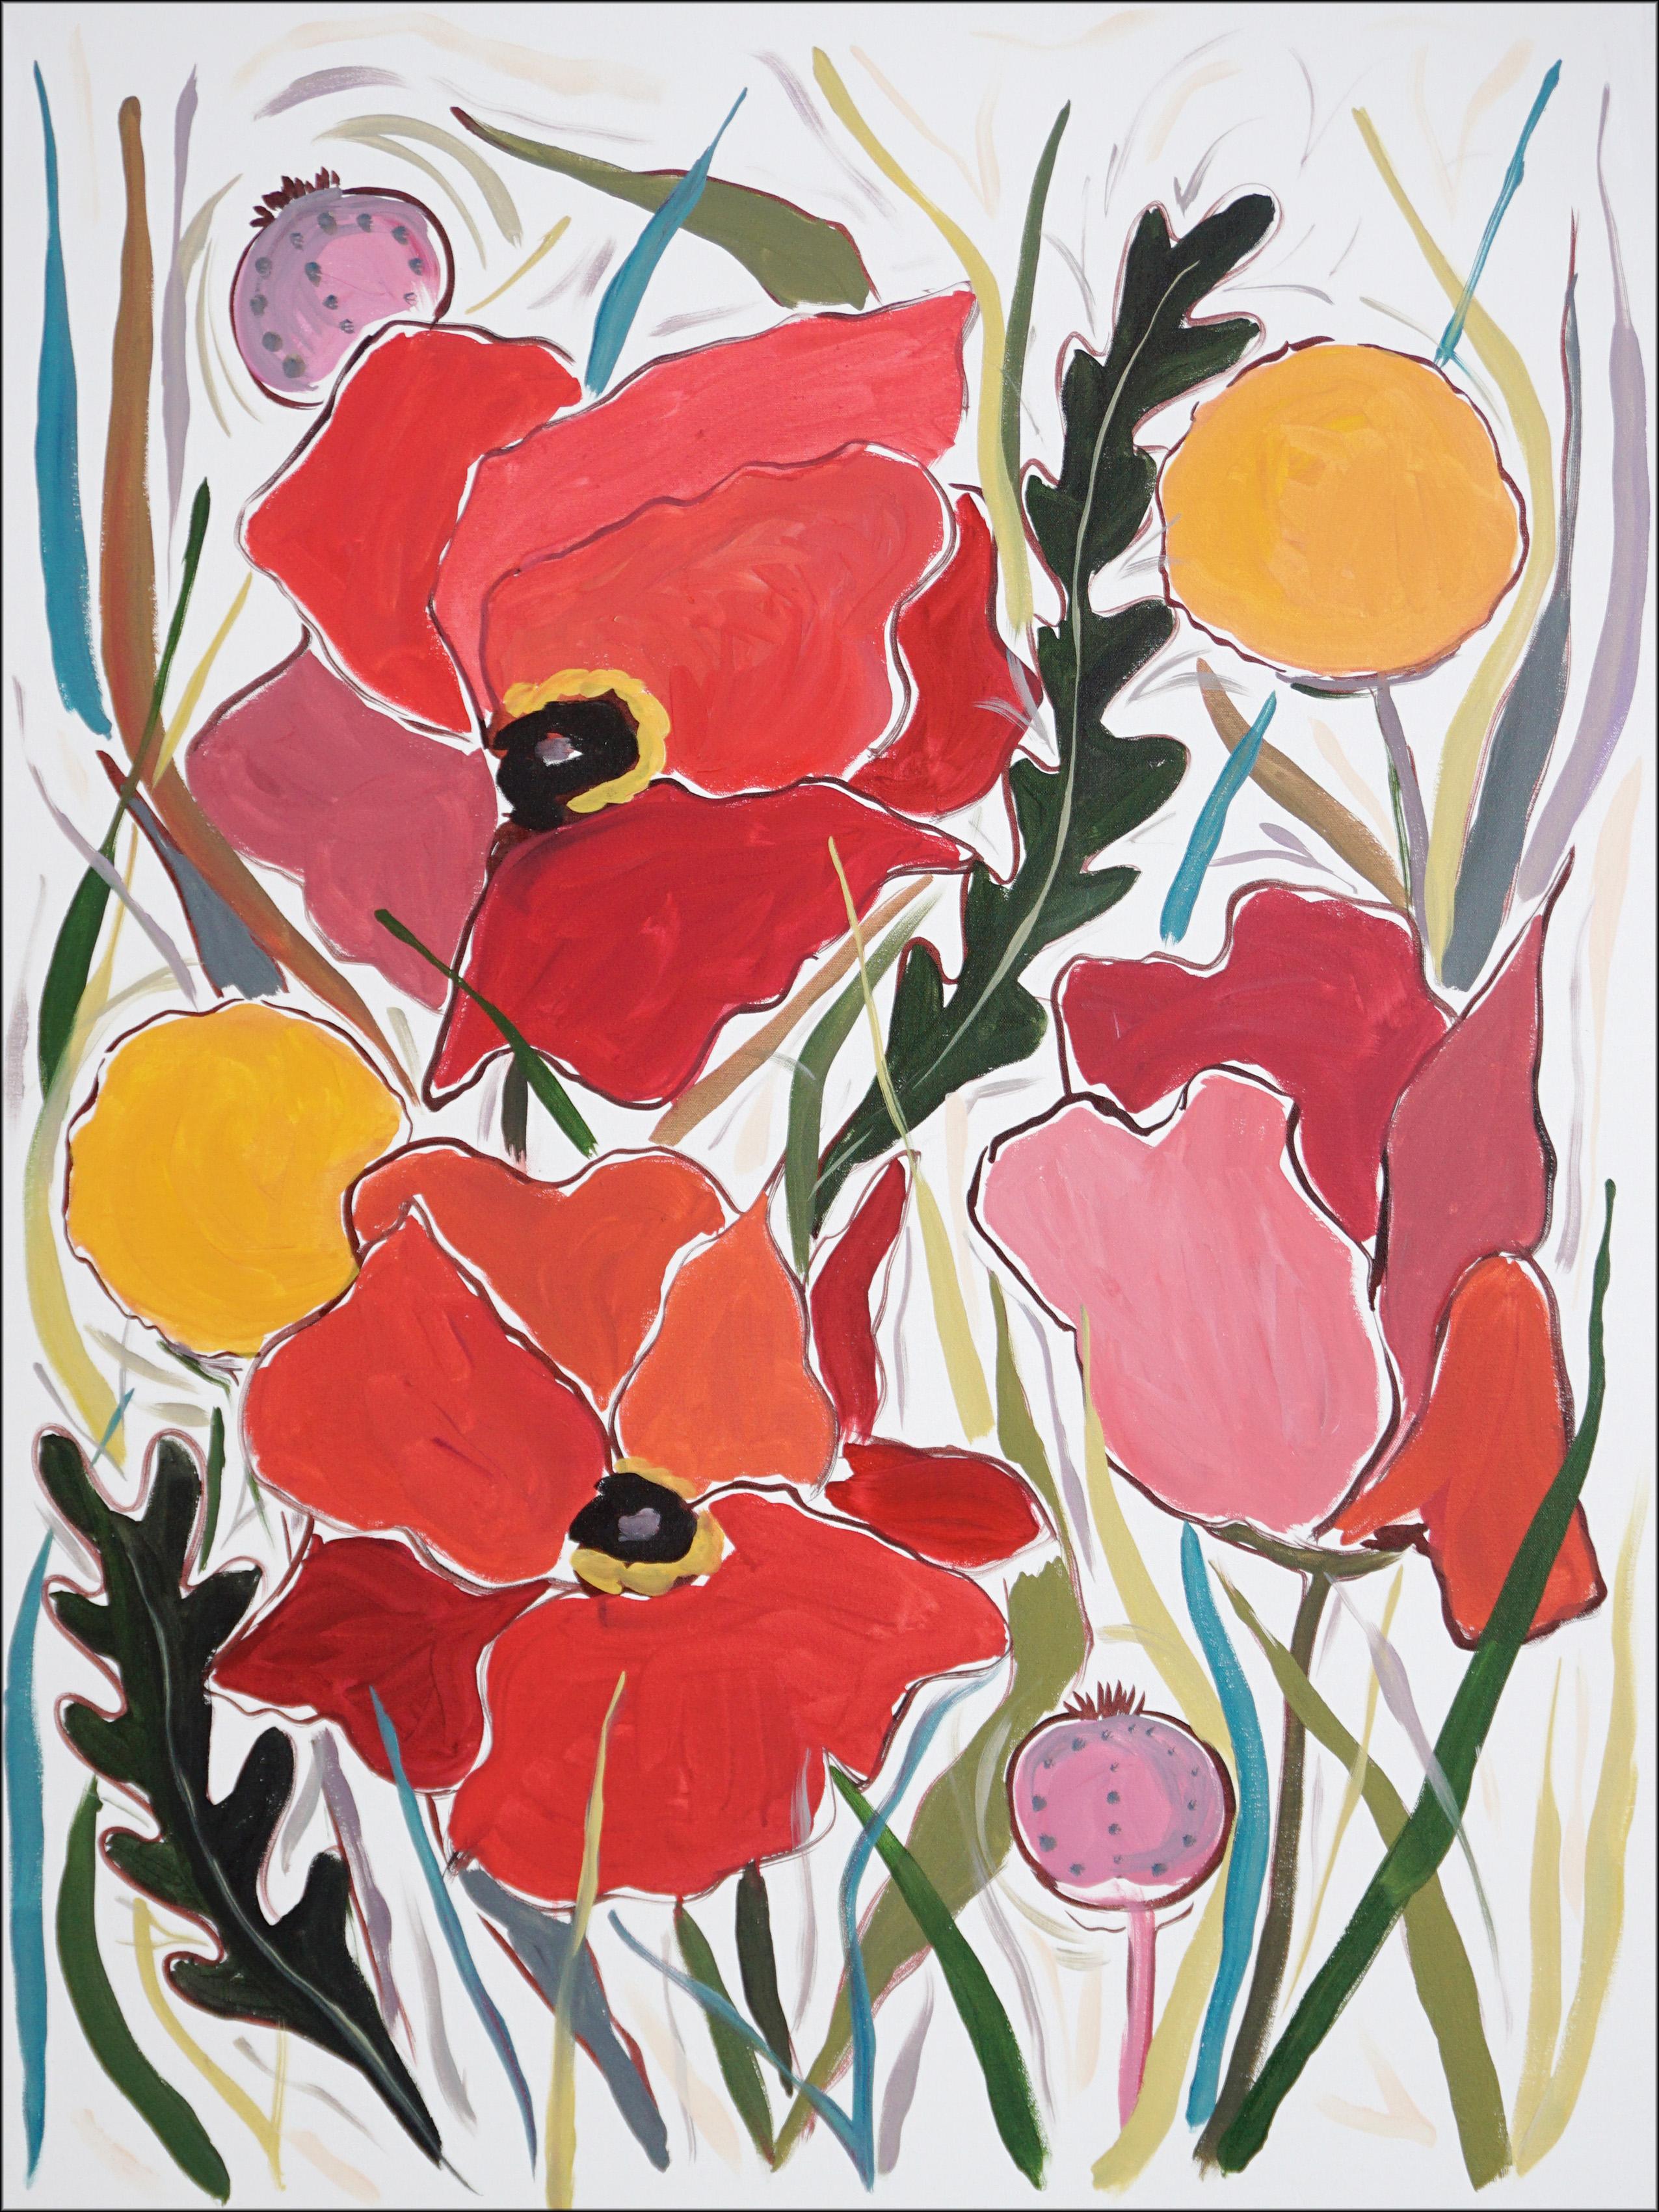 Red Giant Poppies and Yellow Craspedia Flowers on Canvas, Illustration Prairie